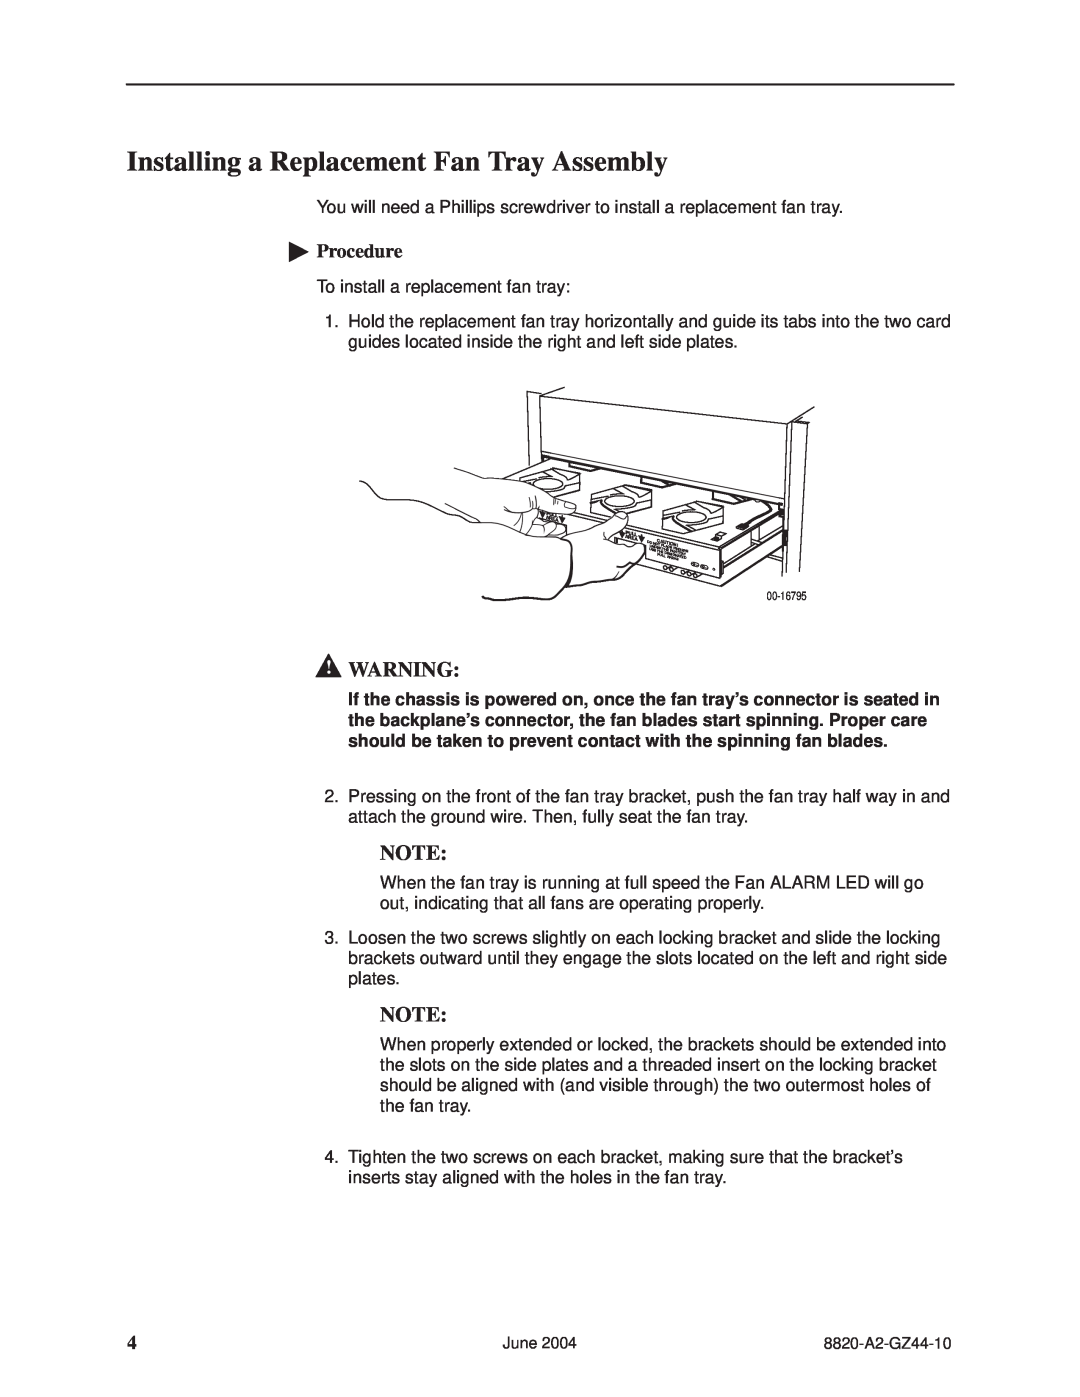 Paradyne 8820-S2-900 installation instructions Installing a Replacement Fan Tray Assembly, Procedure 